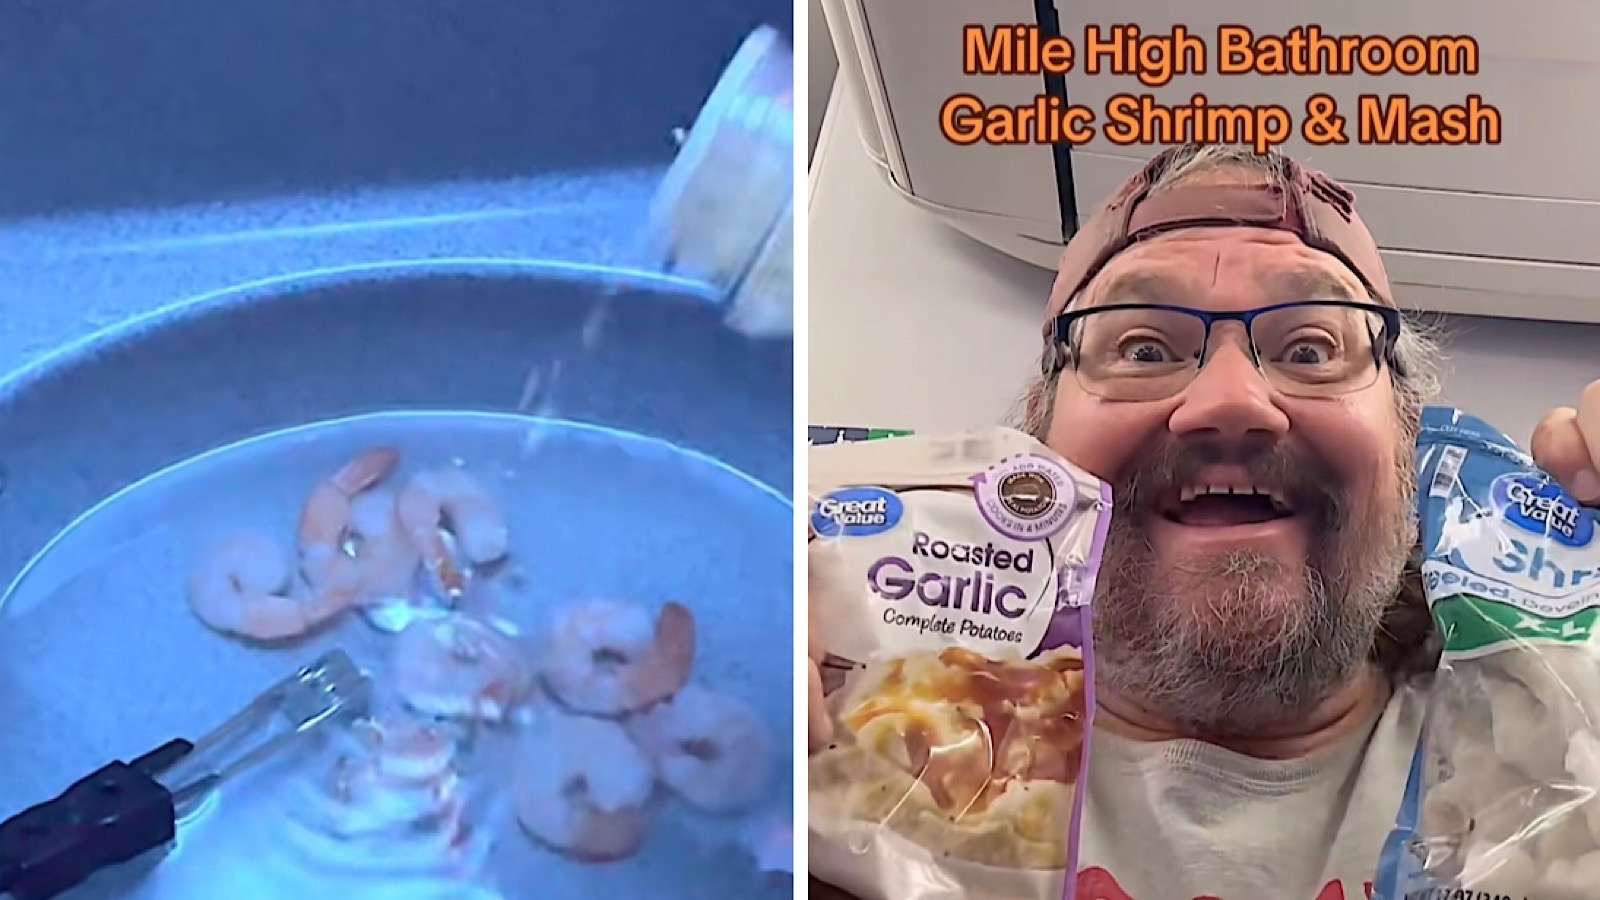 chef makes shrimp in bathroom sink on airplane